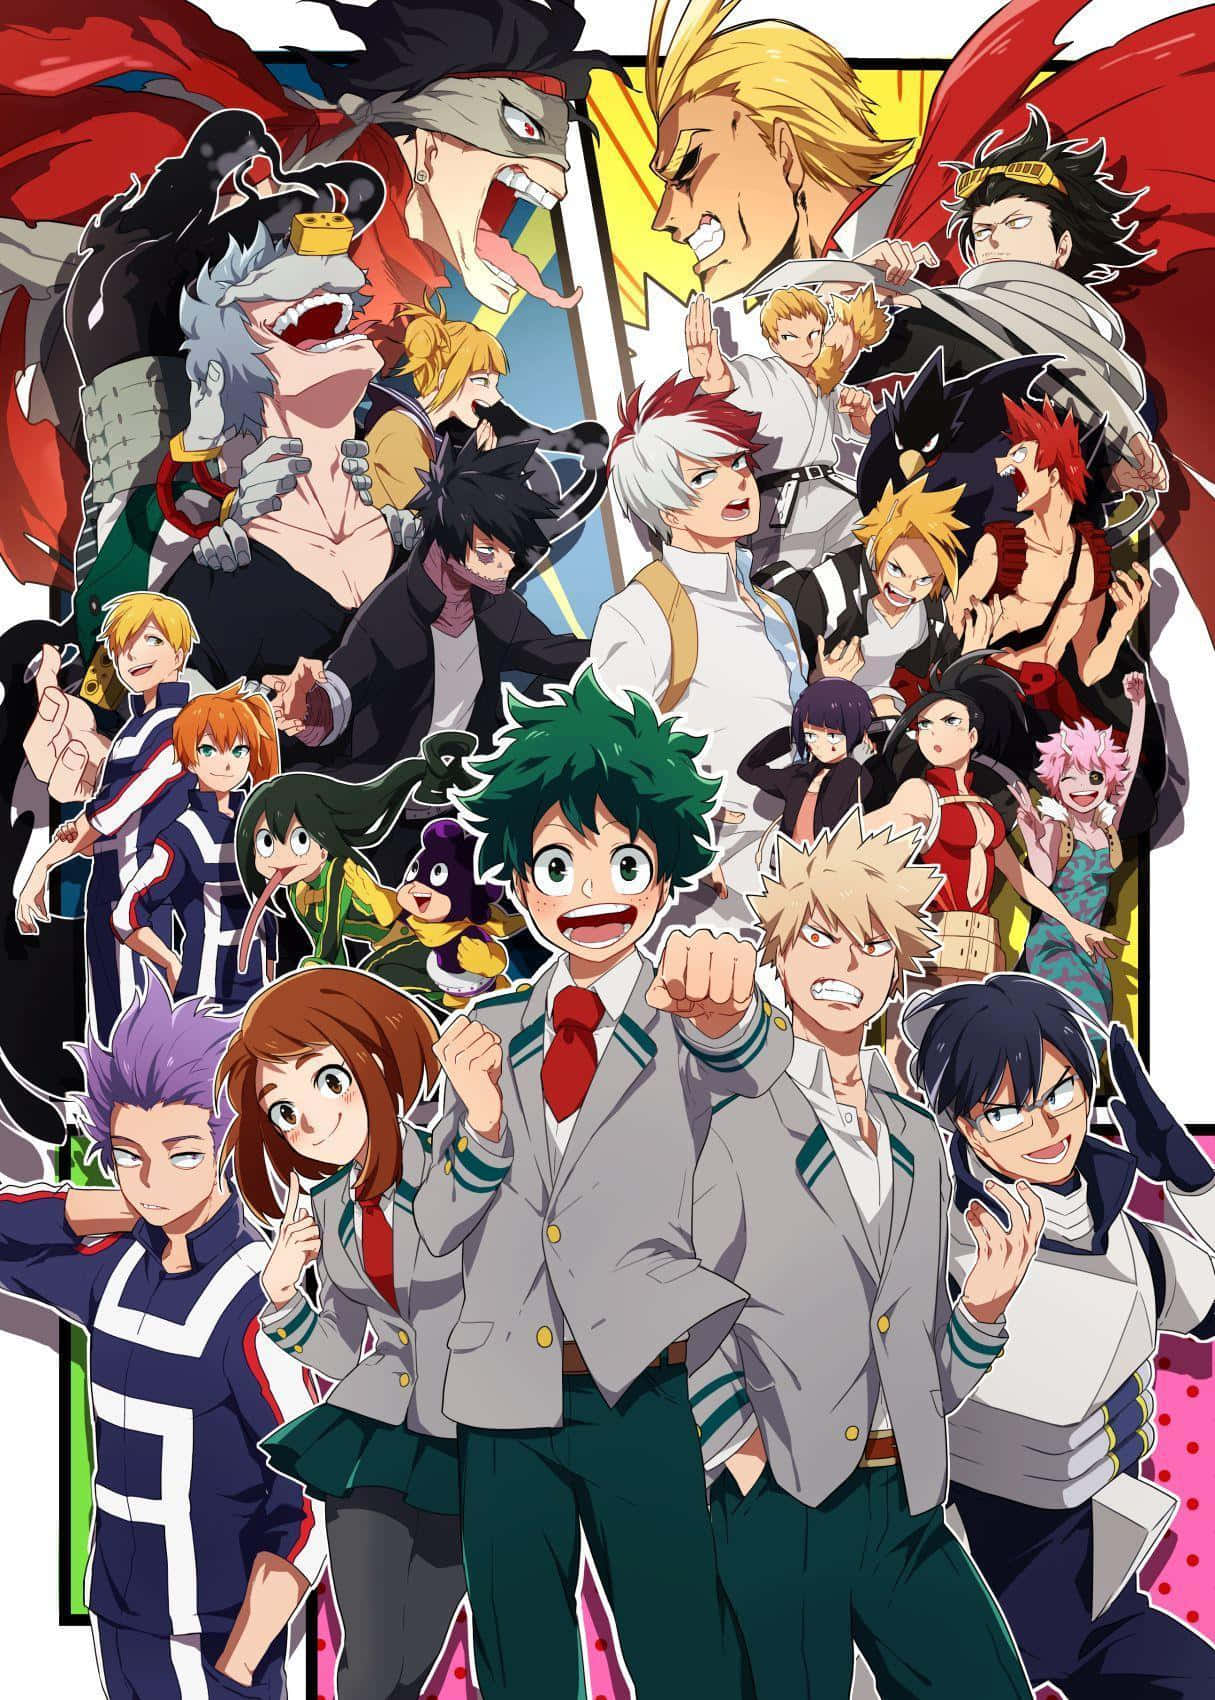 Show your admiration for My Hero Academia by adorning your iPad with this gorgeous wallpaper. Wallpaper